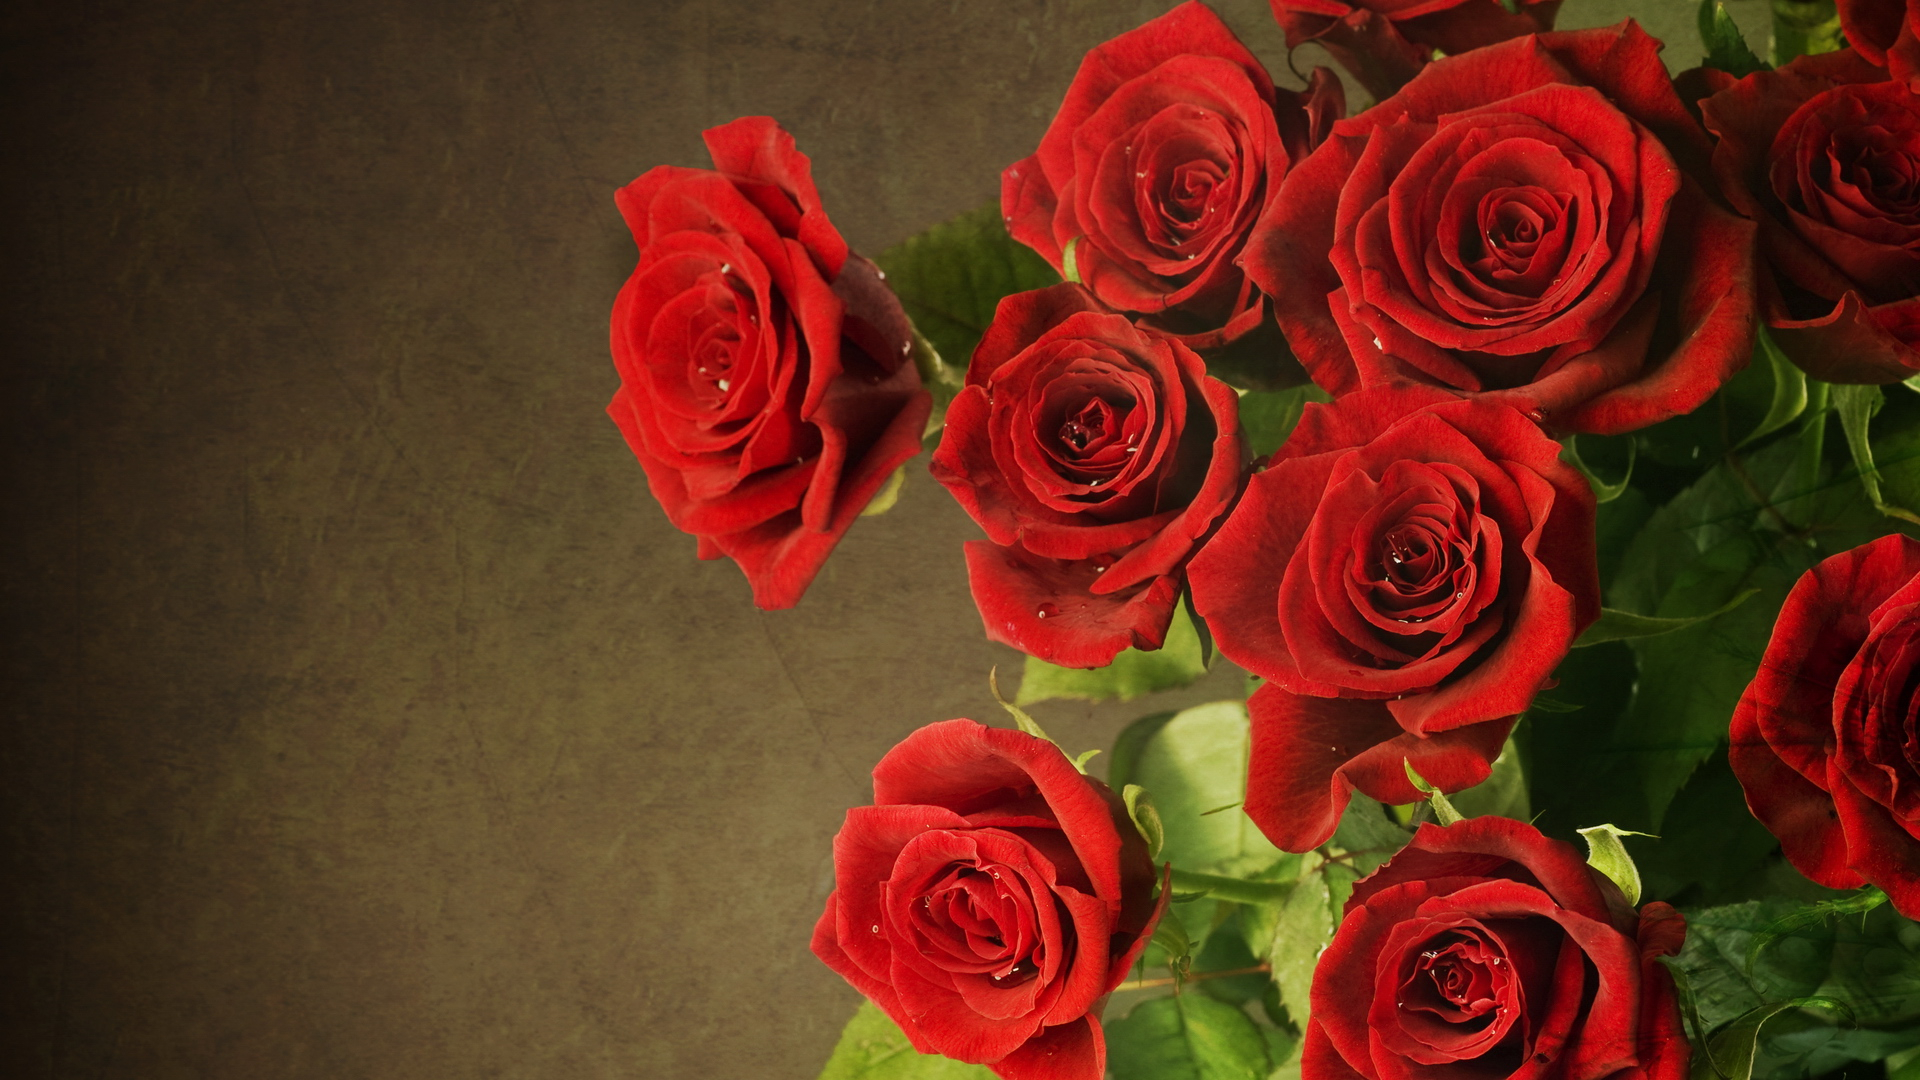  roses wallpaper and theme for Windows 10 All for Windows 10 1920x1080